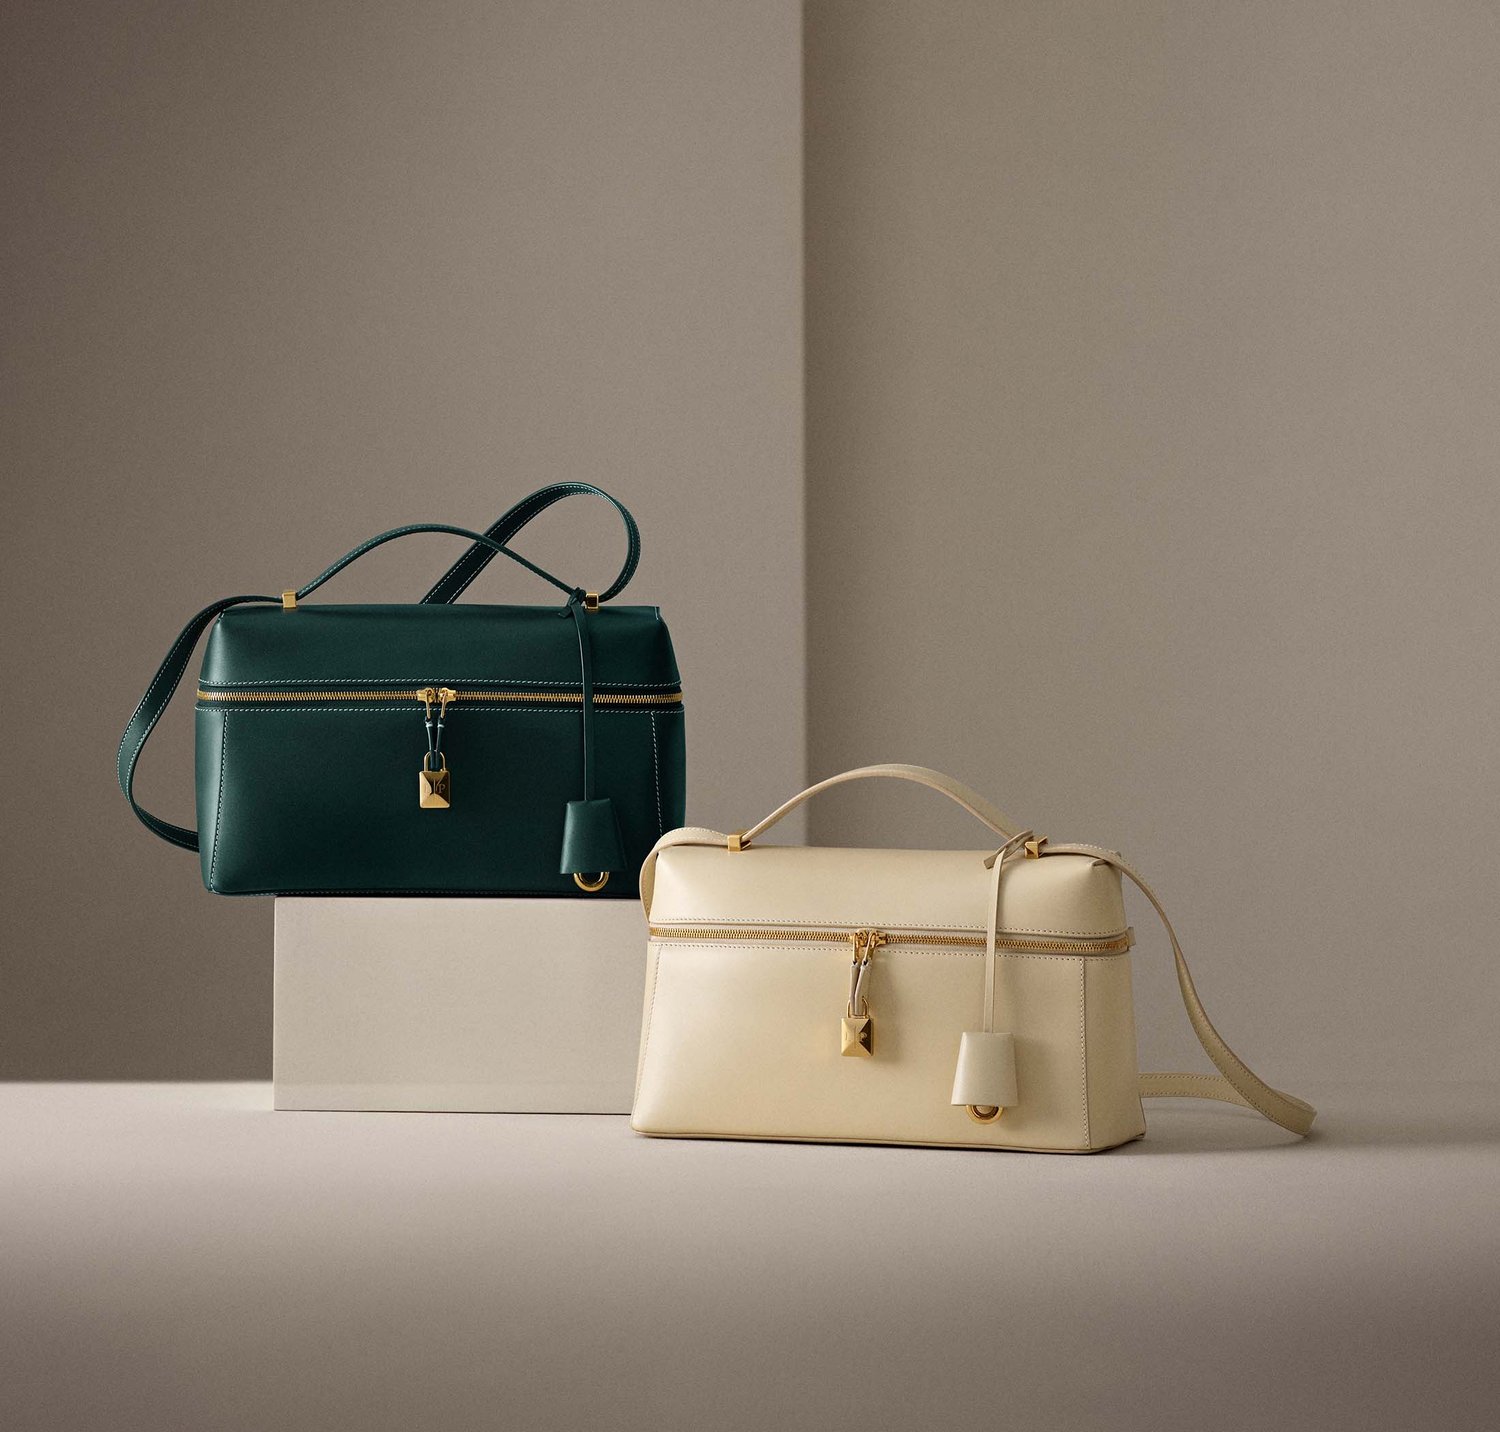 Latest Fashion Brand Updates, Campaigns & Shows  LE MILE Magazine News  Blog - Loro Piana All-New Extra Bag: The Must-Have Accessory of Fall  Winter 2023-2024 - LE MILE